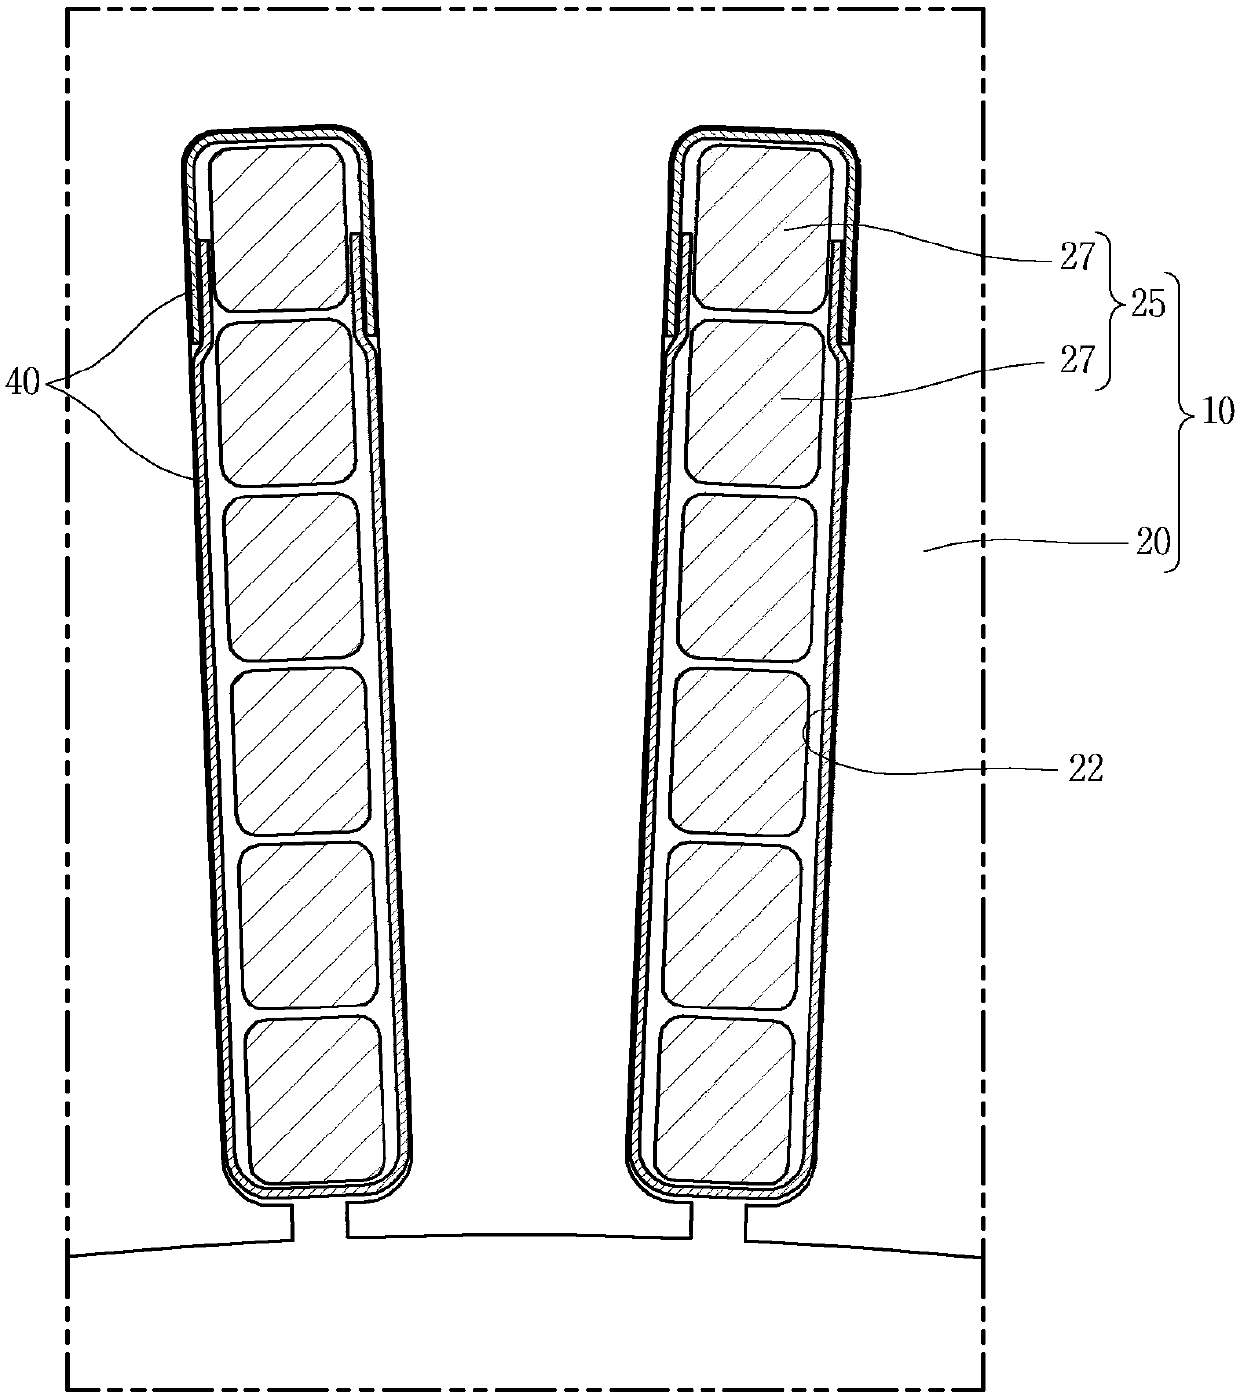 Composite insulating member, manufacturing method therefor, and electrical device comprising composite insulating member